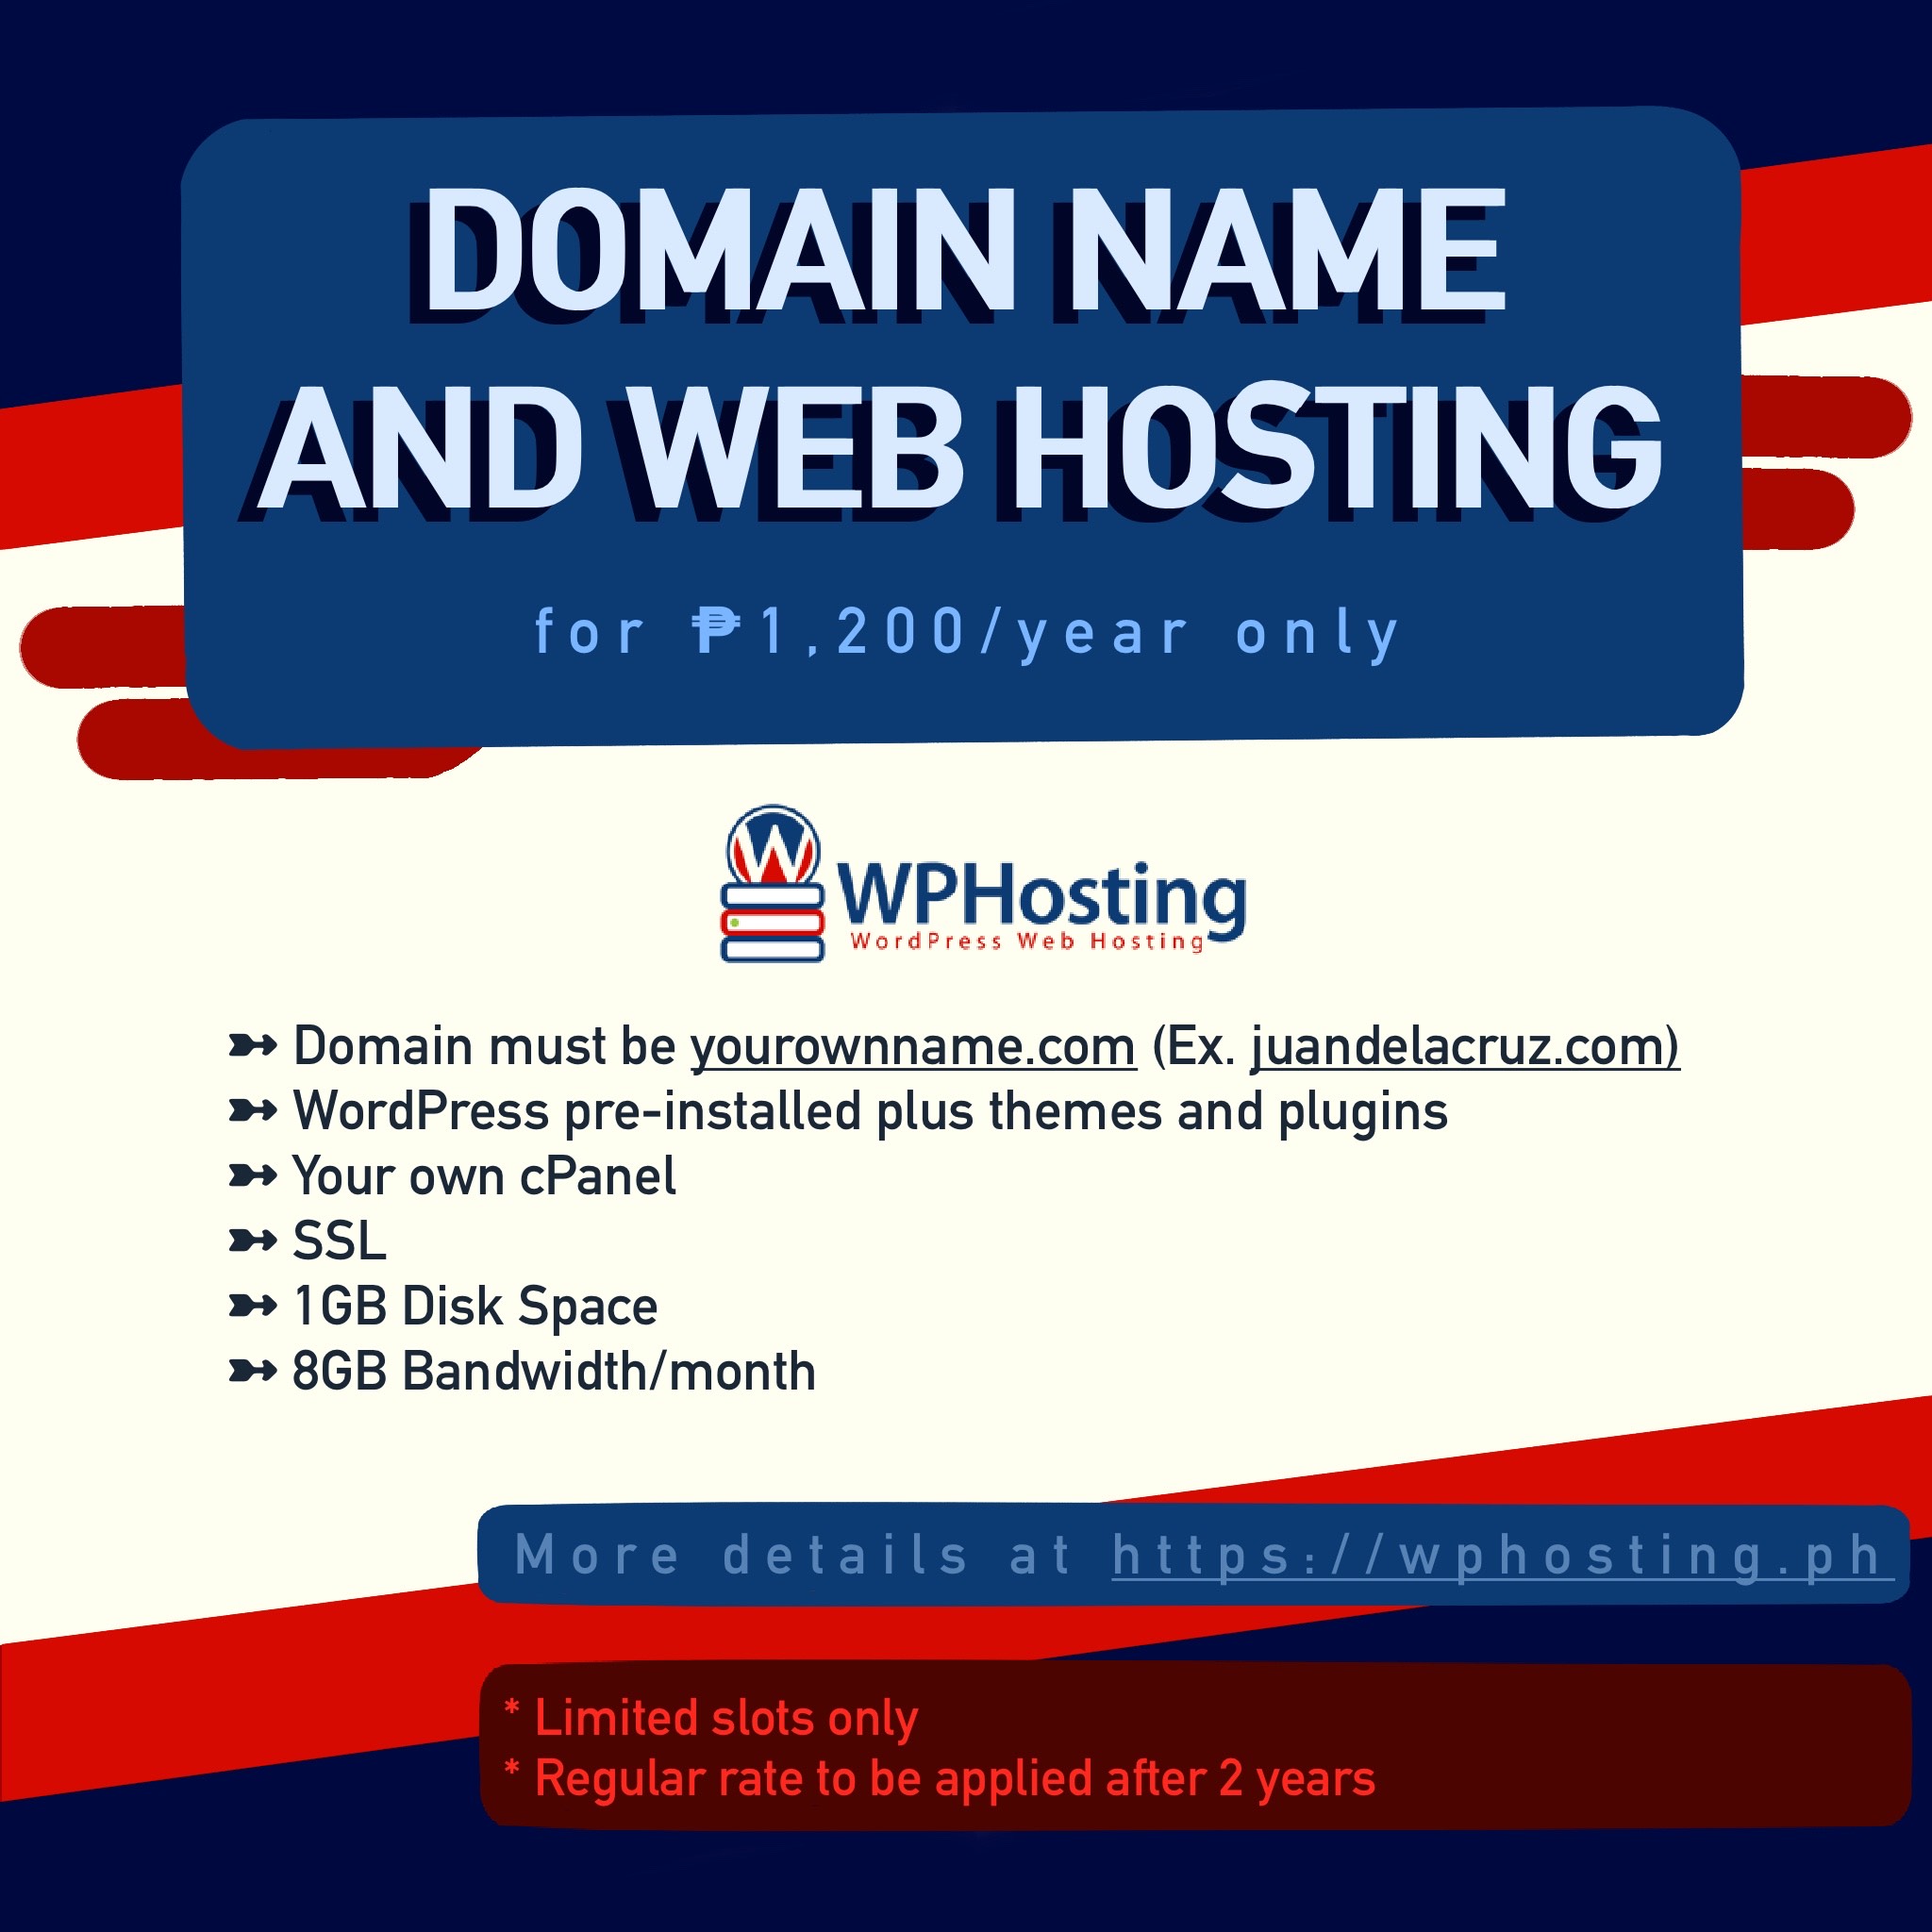 Domain Name and Web Hosting for P1,200/year only